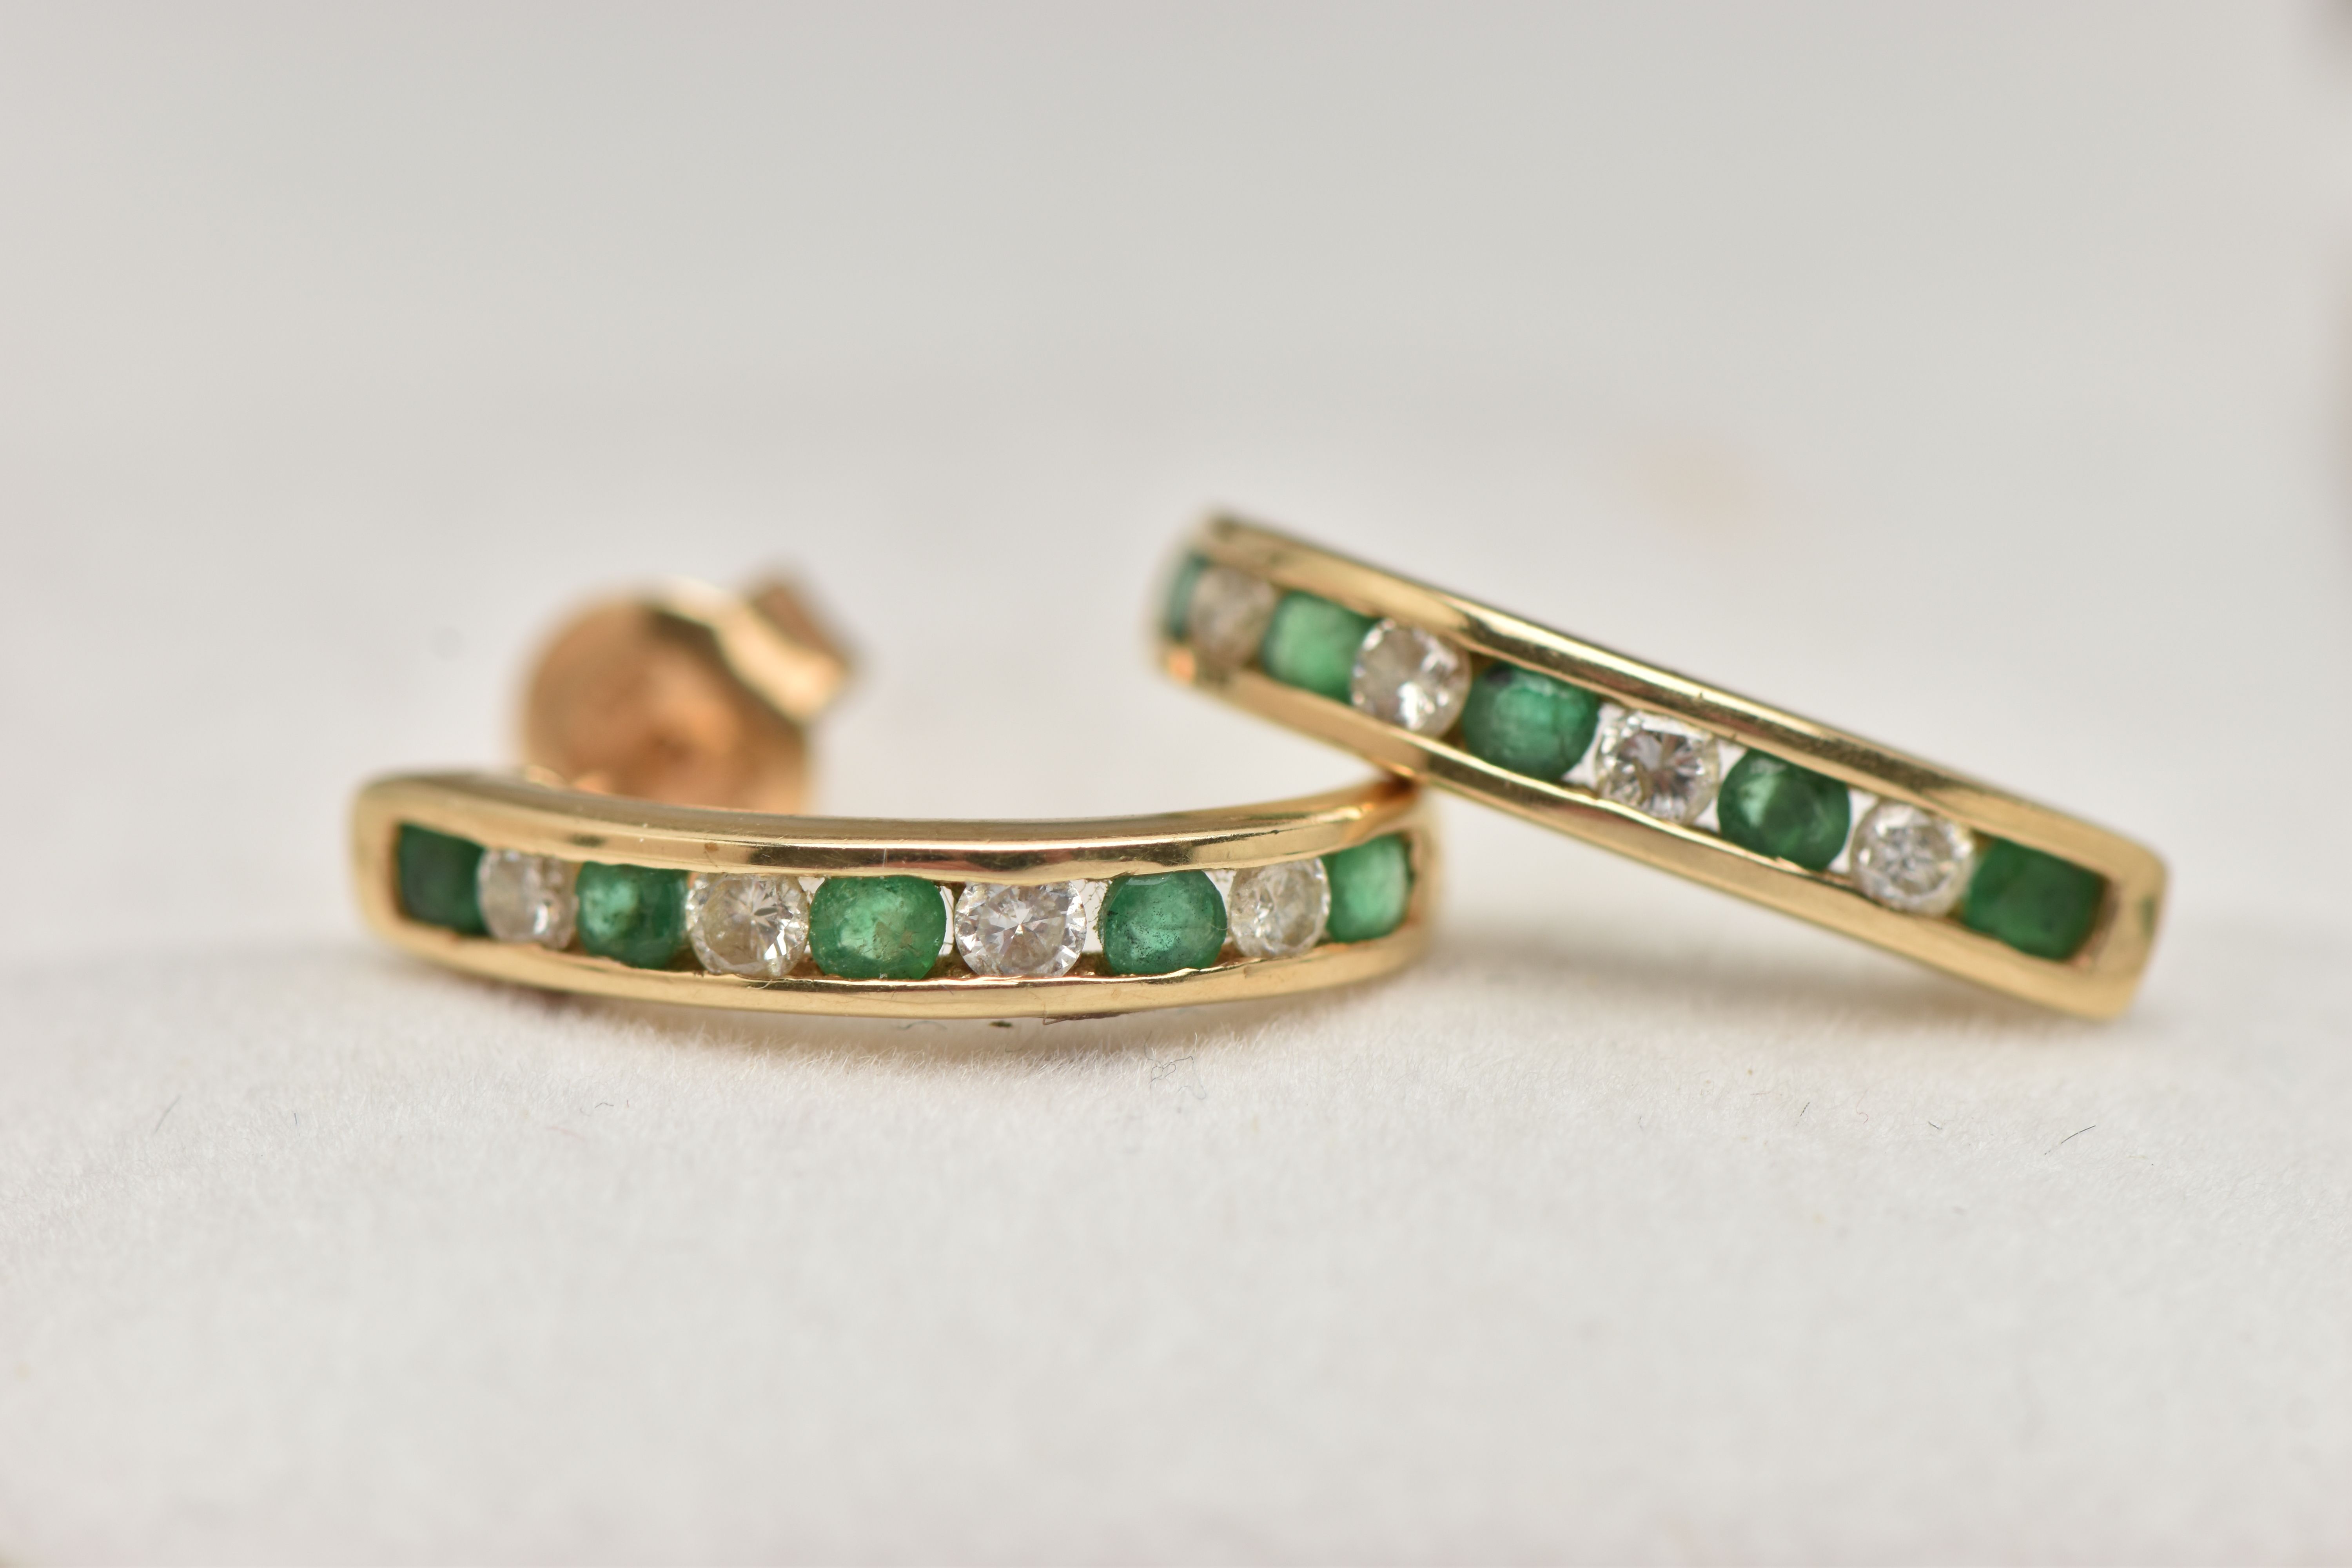 A PAIR OF EMERALD AND DIAMOND EARRINGS, each designed as half hoops channel set with four - Image 2 of 3